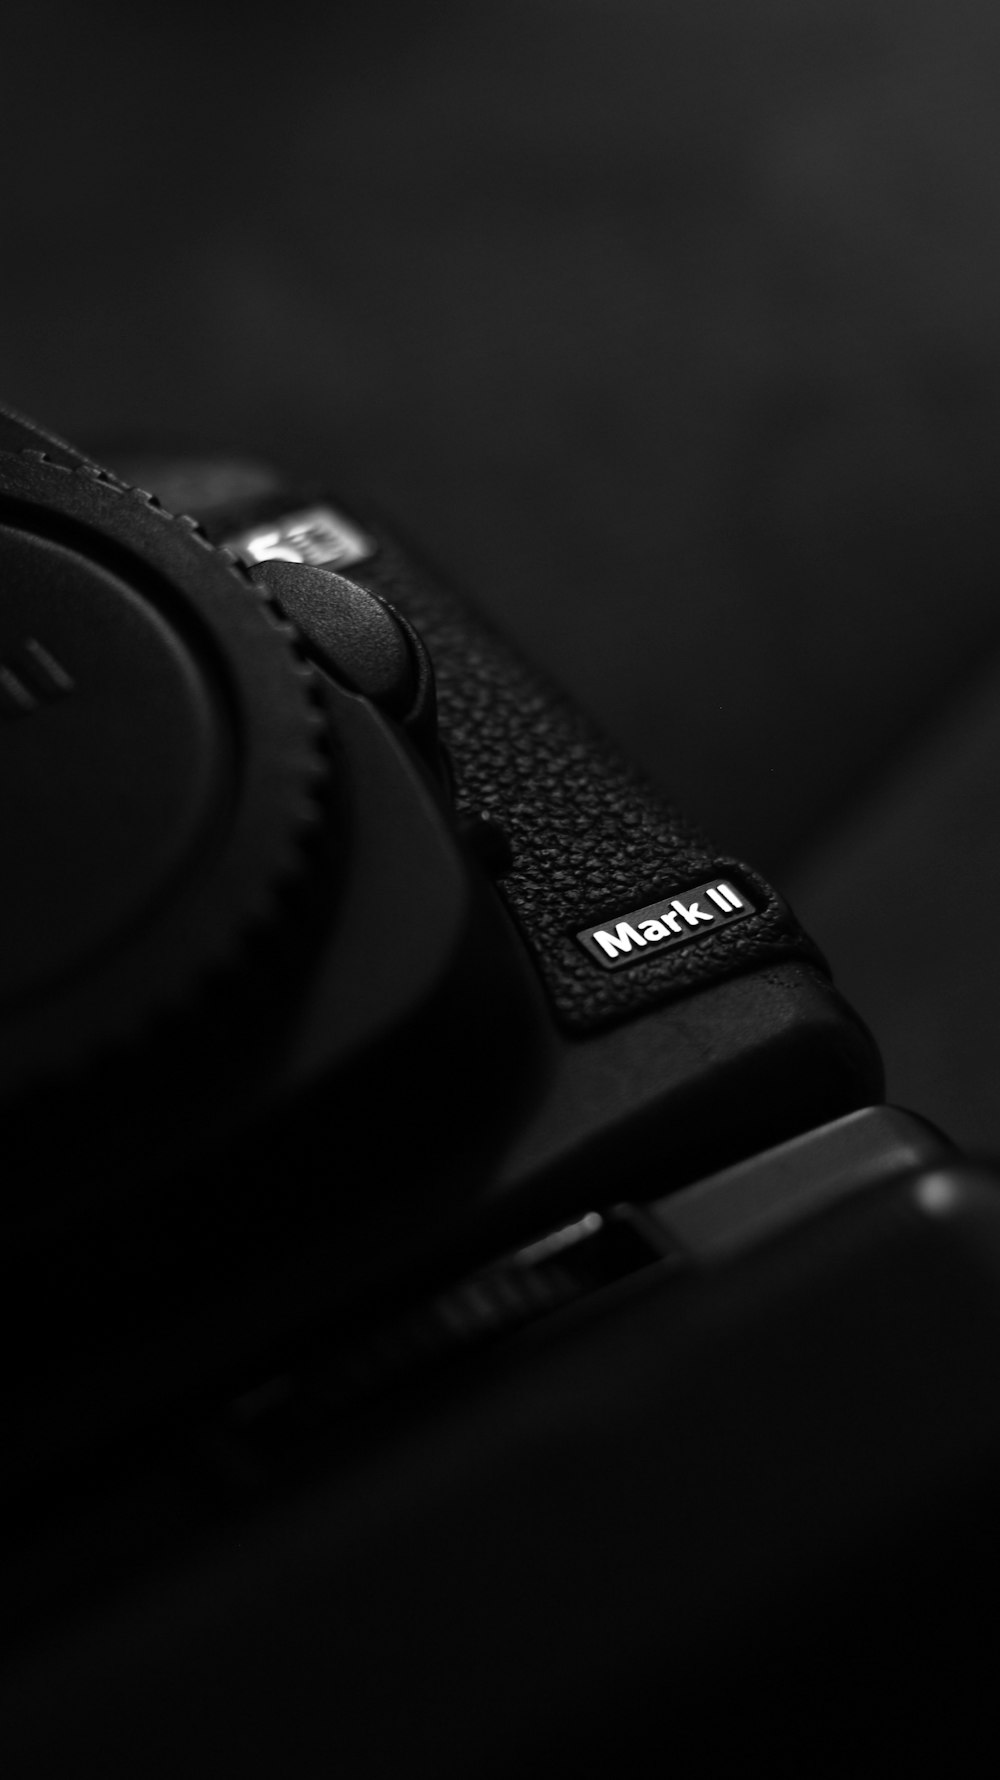 a close up of a camera with a black background